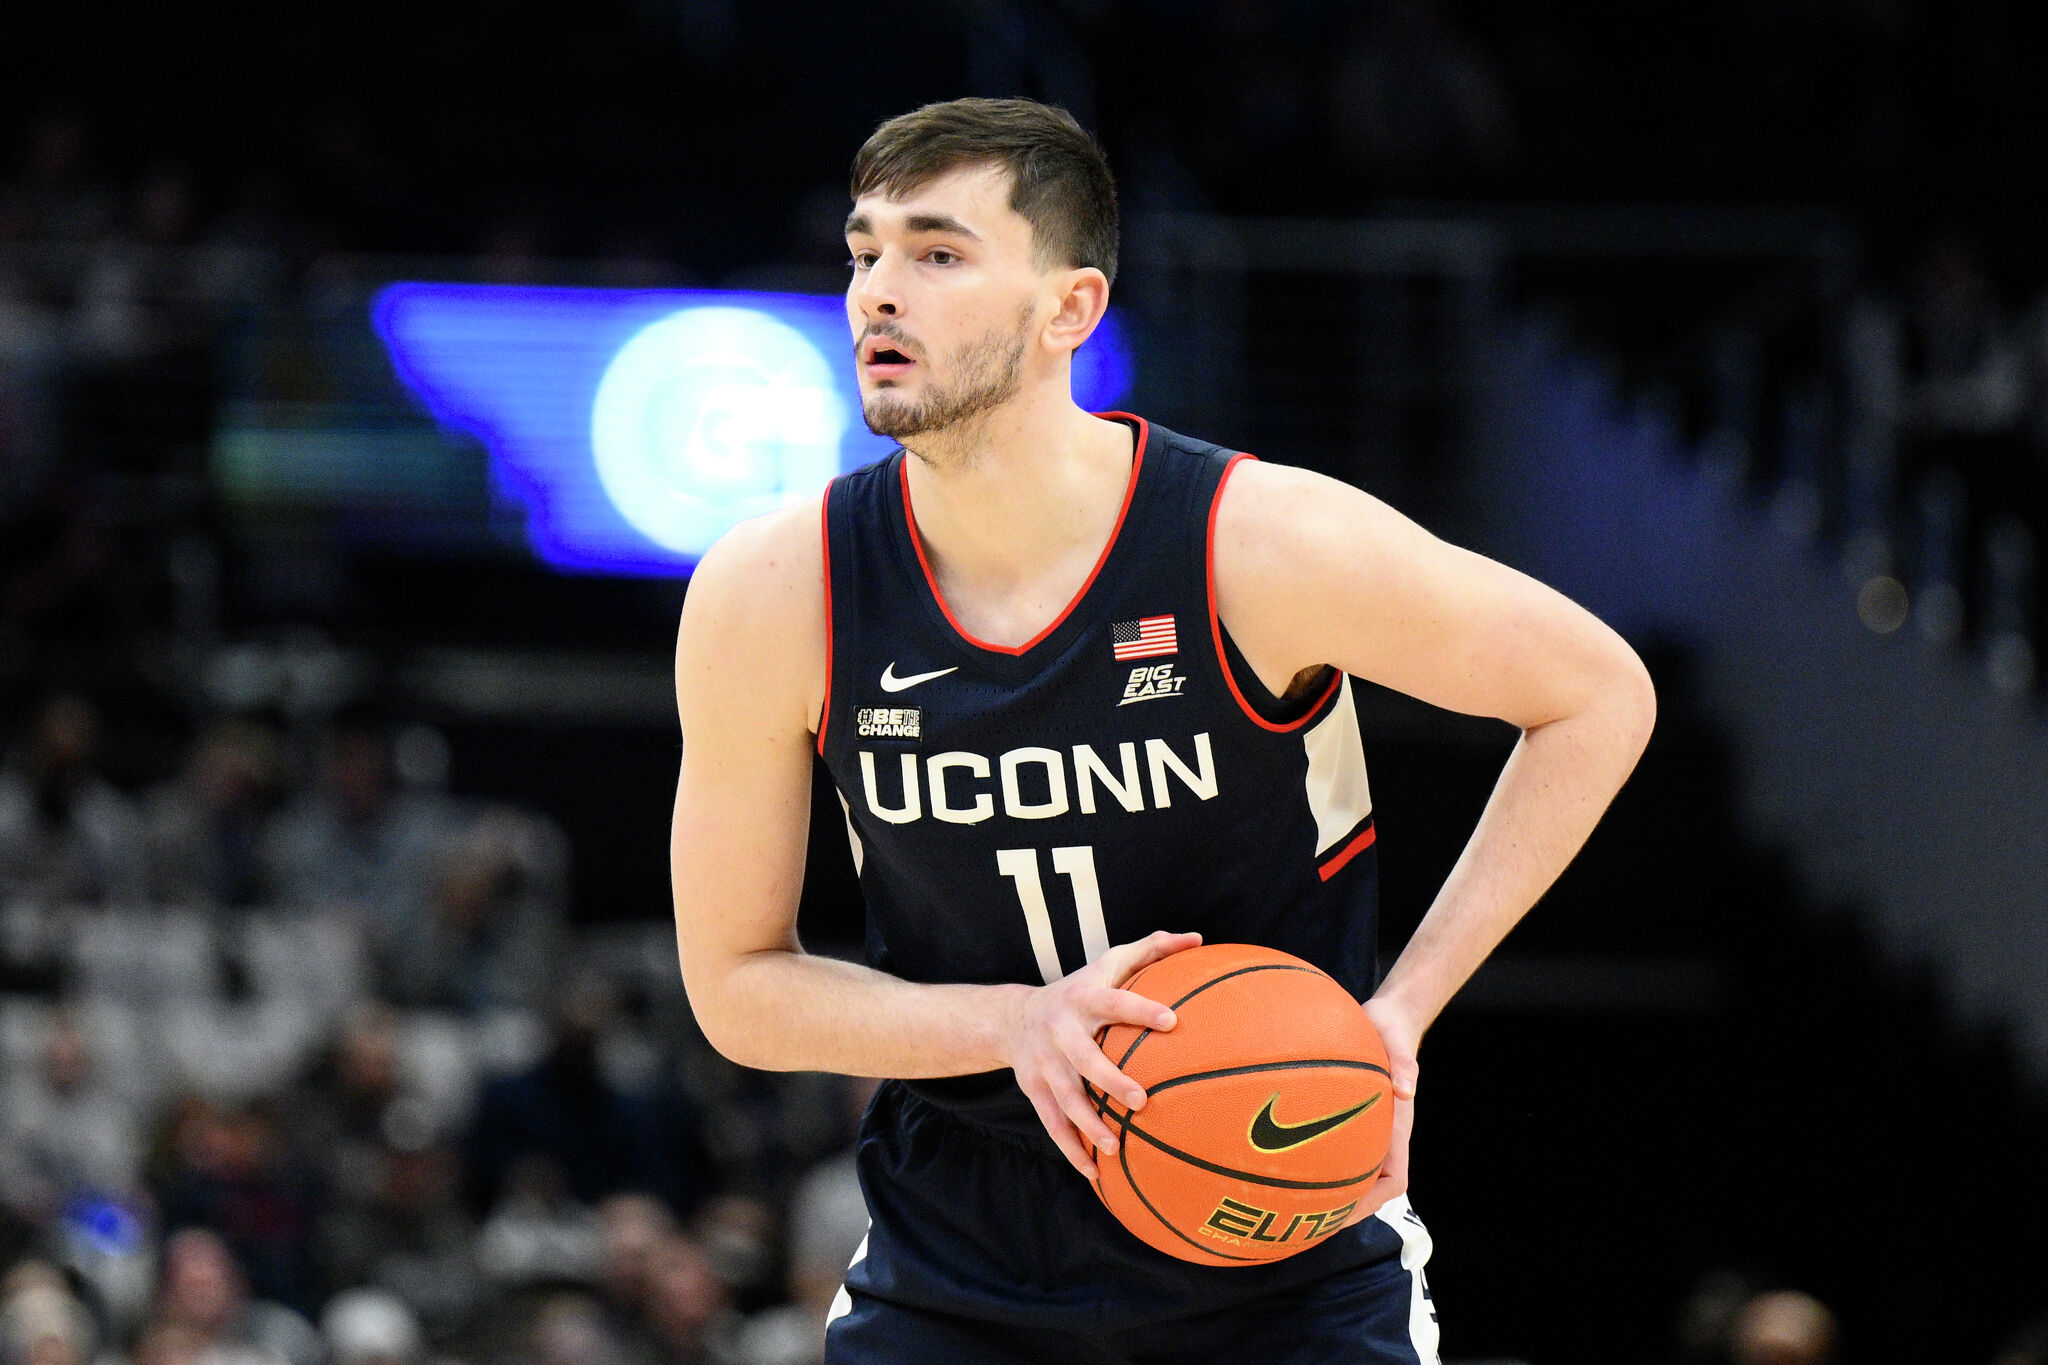 Borges: These UConn Huskies were always there for each other